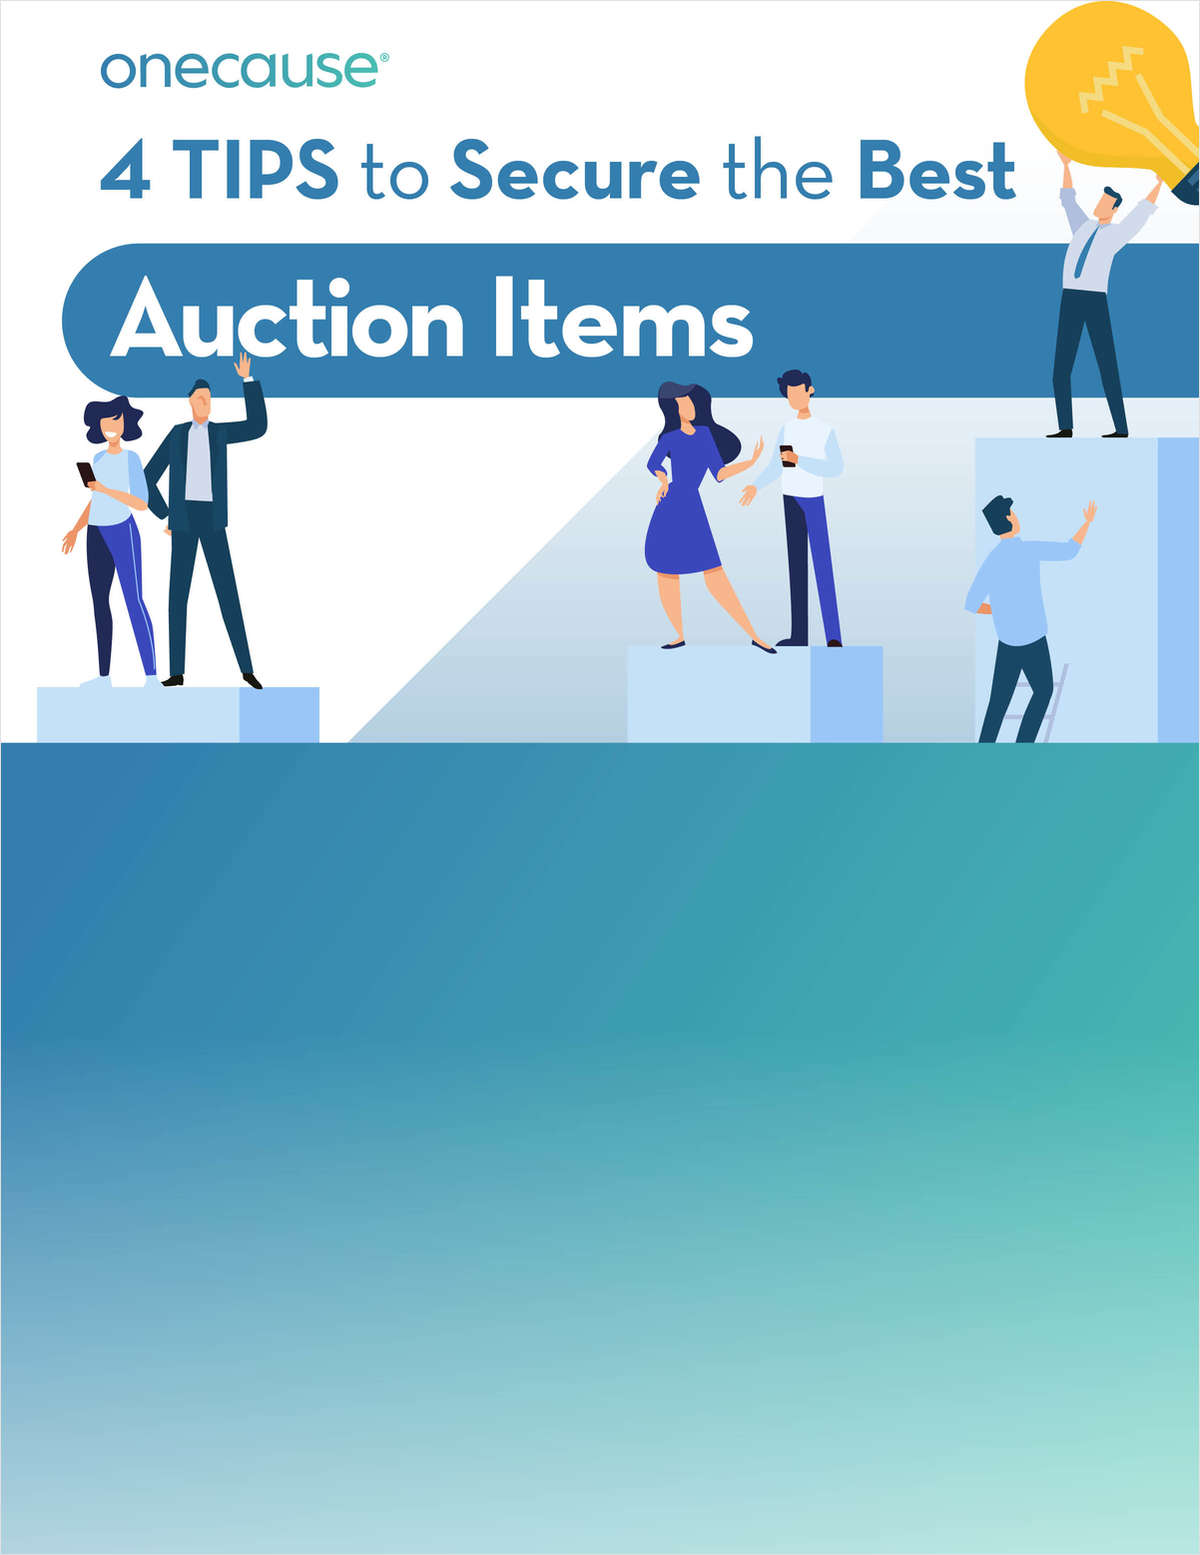 4 Tips to Secure the Best Auction Items